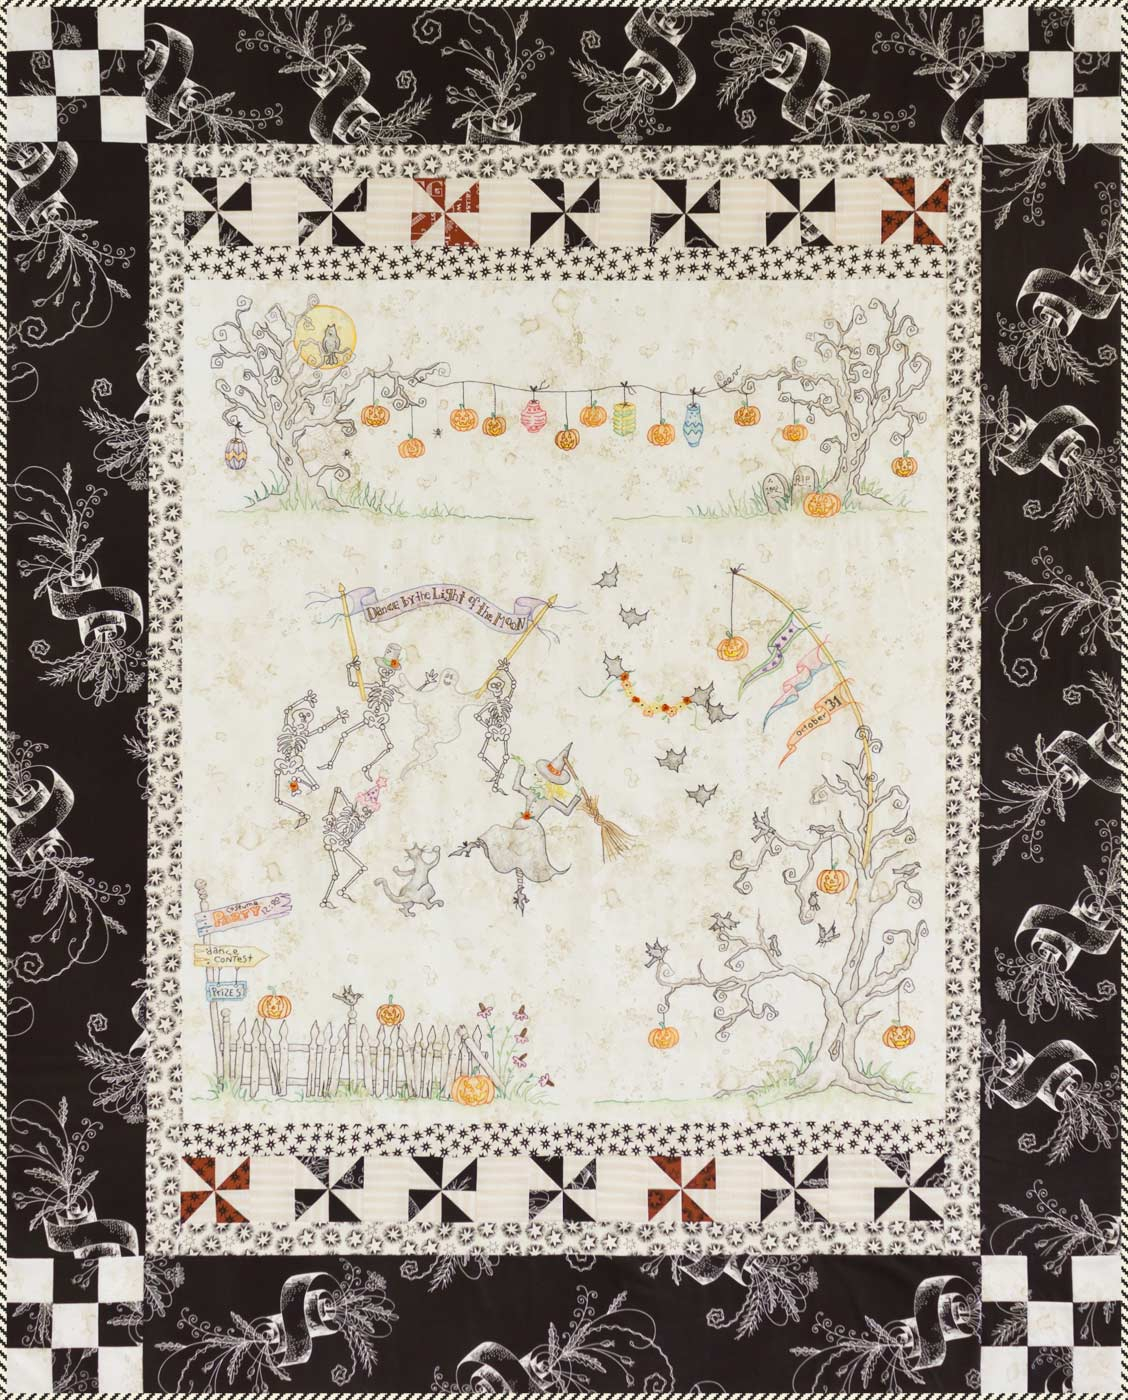 Crabapple Hill Embroidery Patterns Quilt Pattern Dance The Light Of The Moon